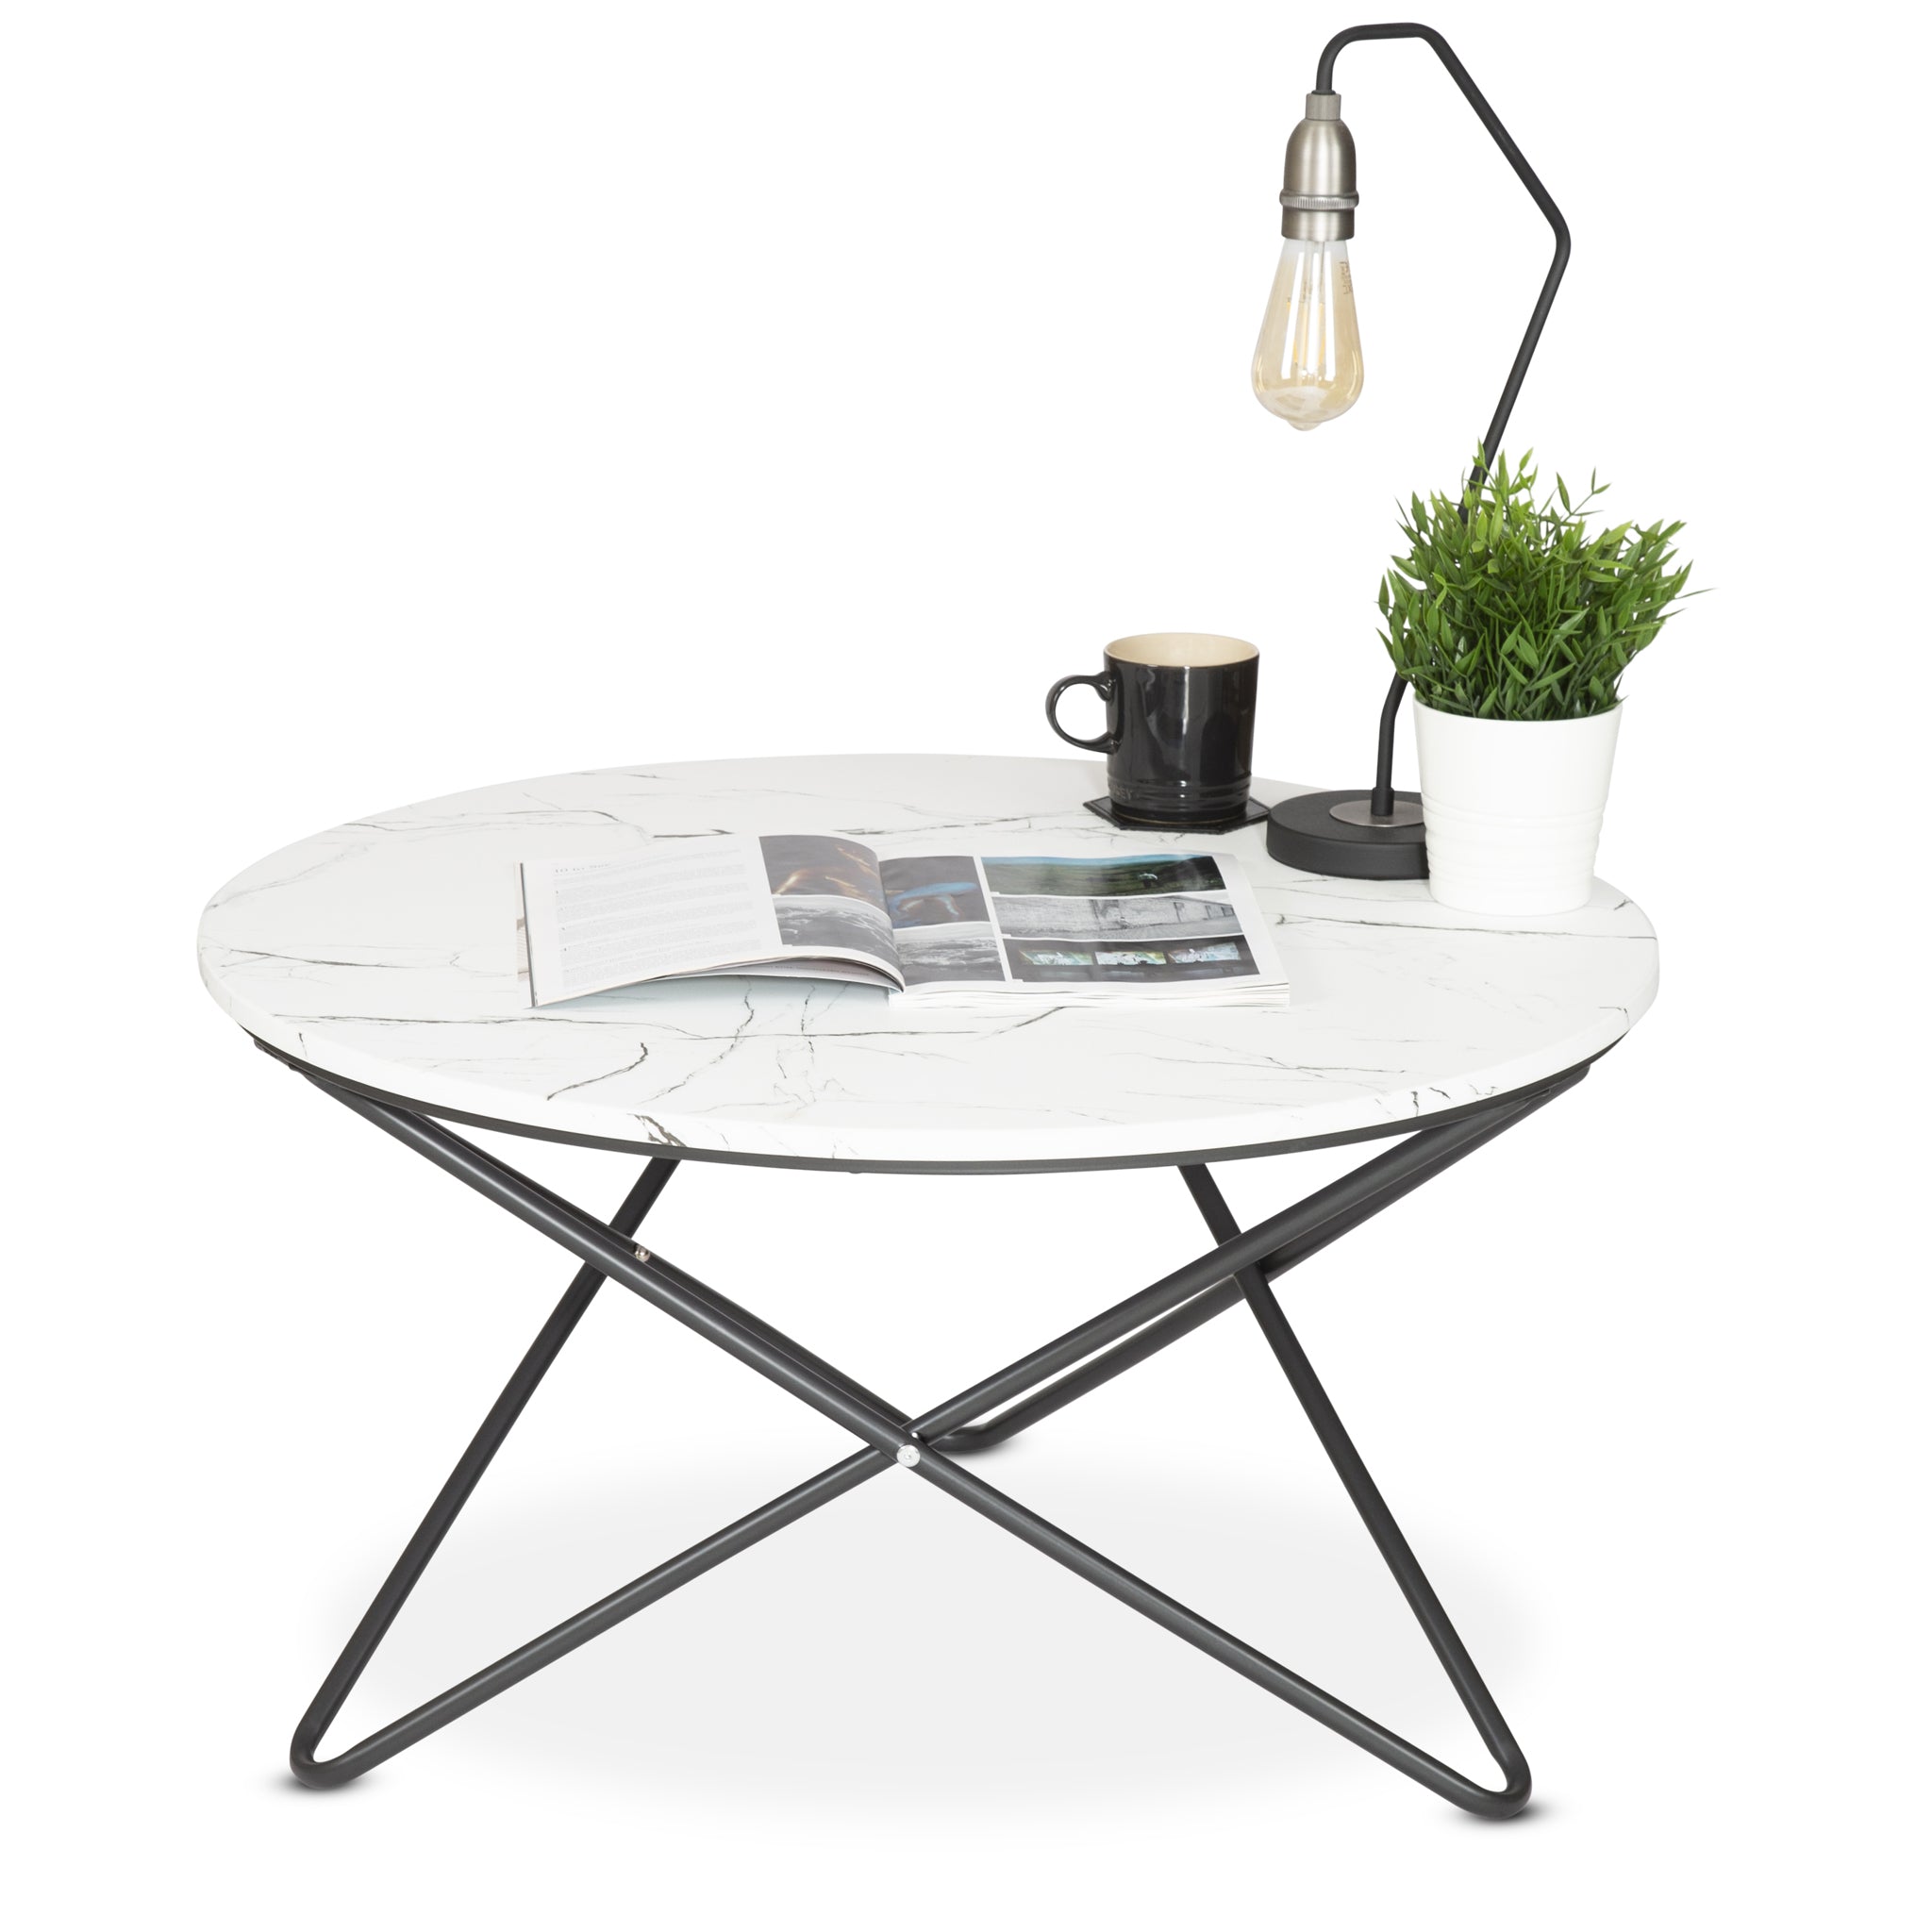 Marble Effect Coffee Table With Metal Legs - 80 x 45cm